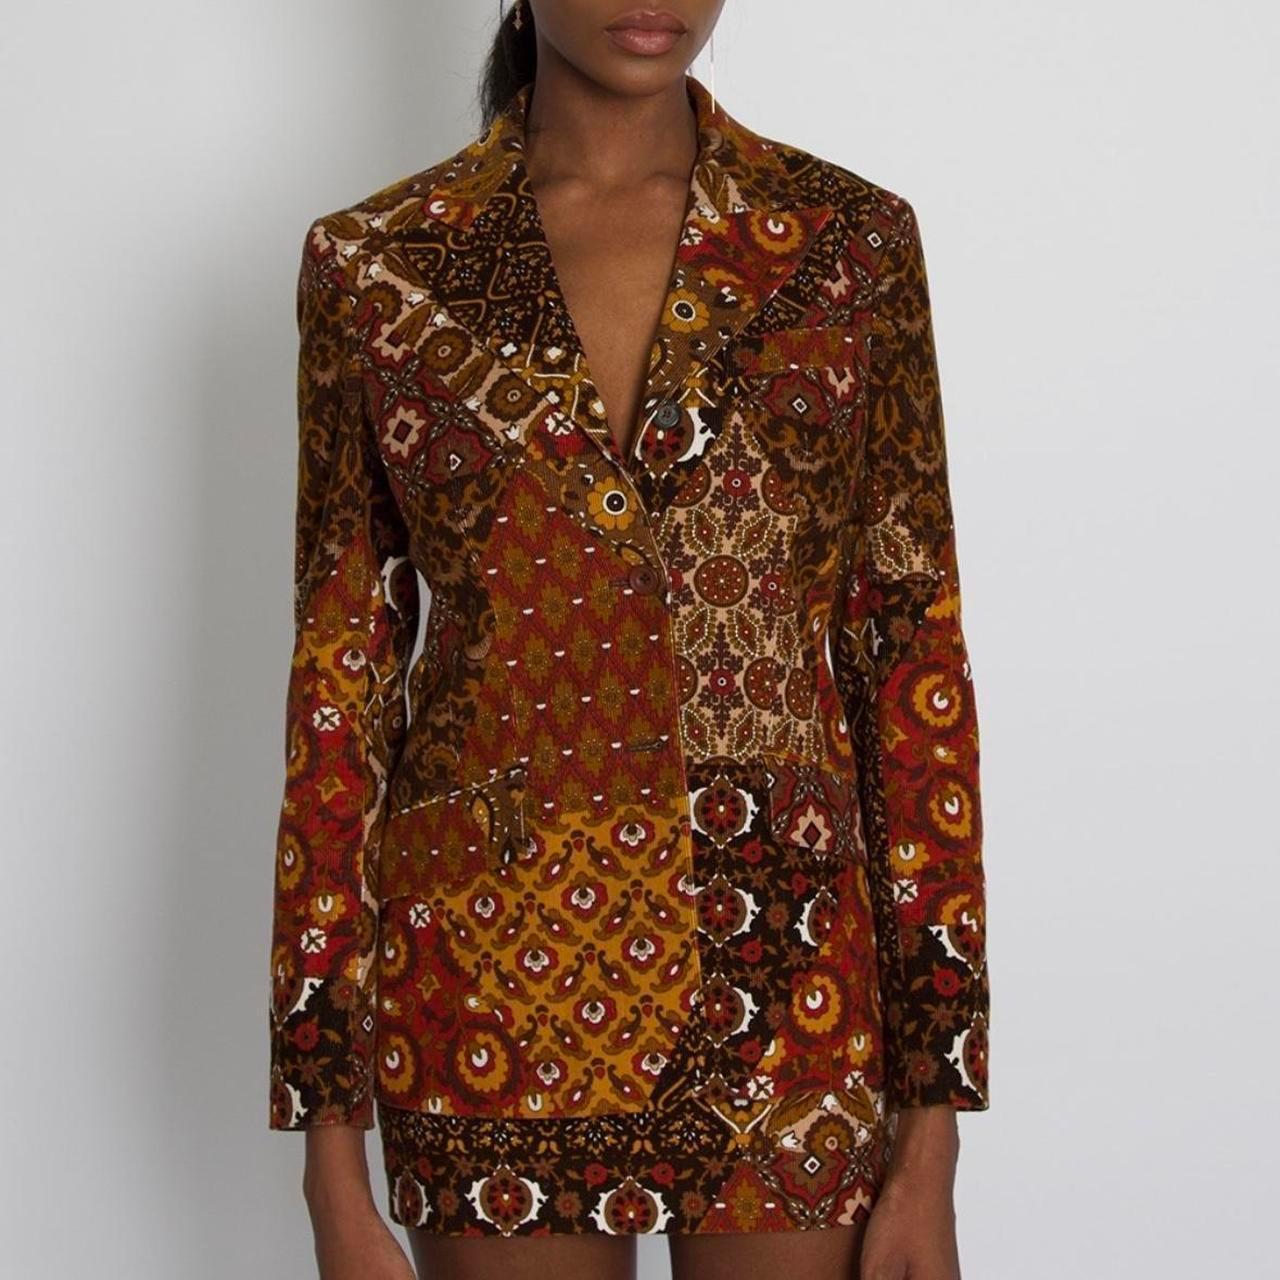 Dolce & Gabbana Blazer 

Paisley Floral Patchwork Corduroy Jacket

Fitted blazer, with Groovy 70s Inspire Print


CONDITION: This item is a vintage/pre-worn piece so some signs of natural wear and age are to be expected. However good general